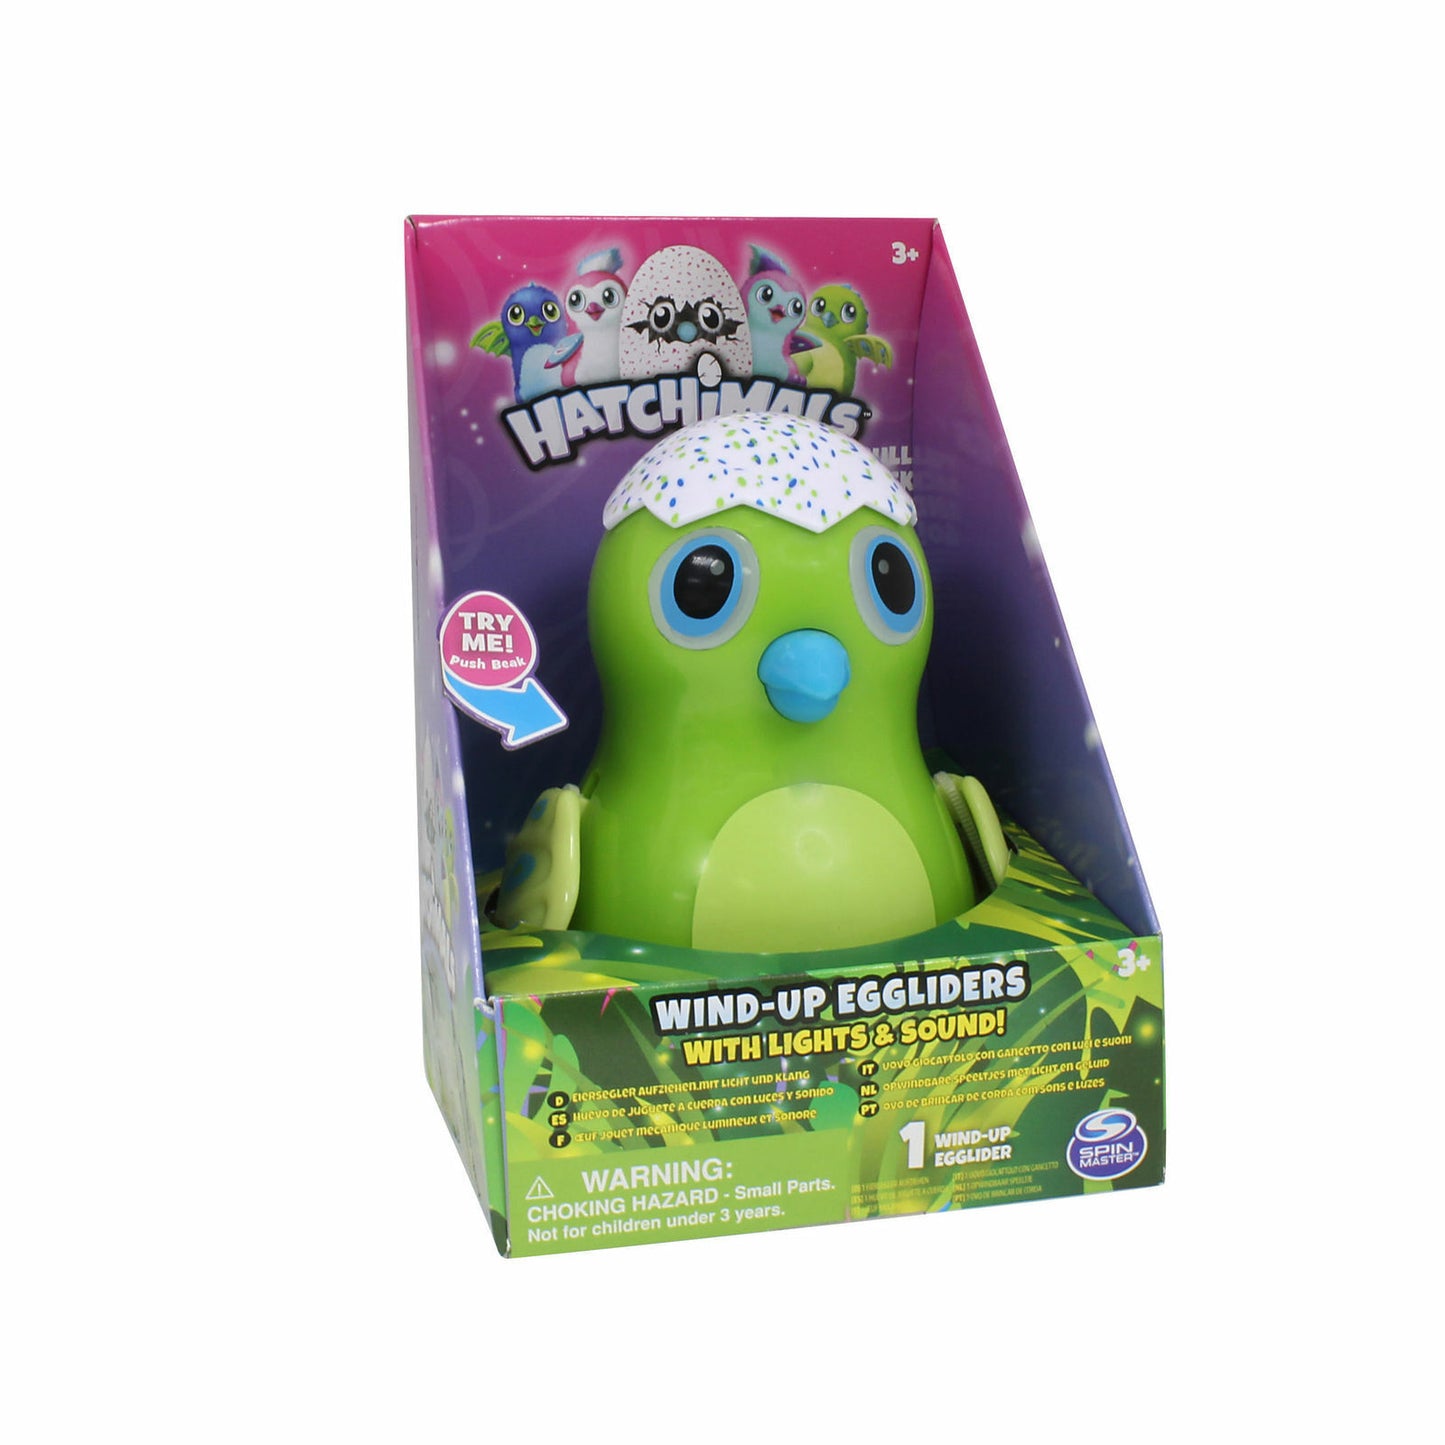 Hatchimals Wind-Up Eggliders with Lights & Sound